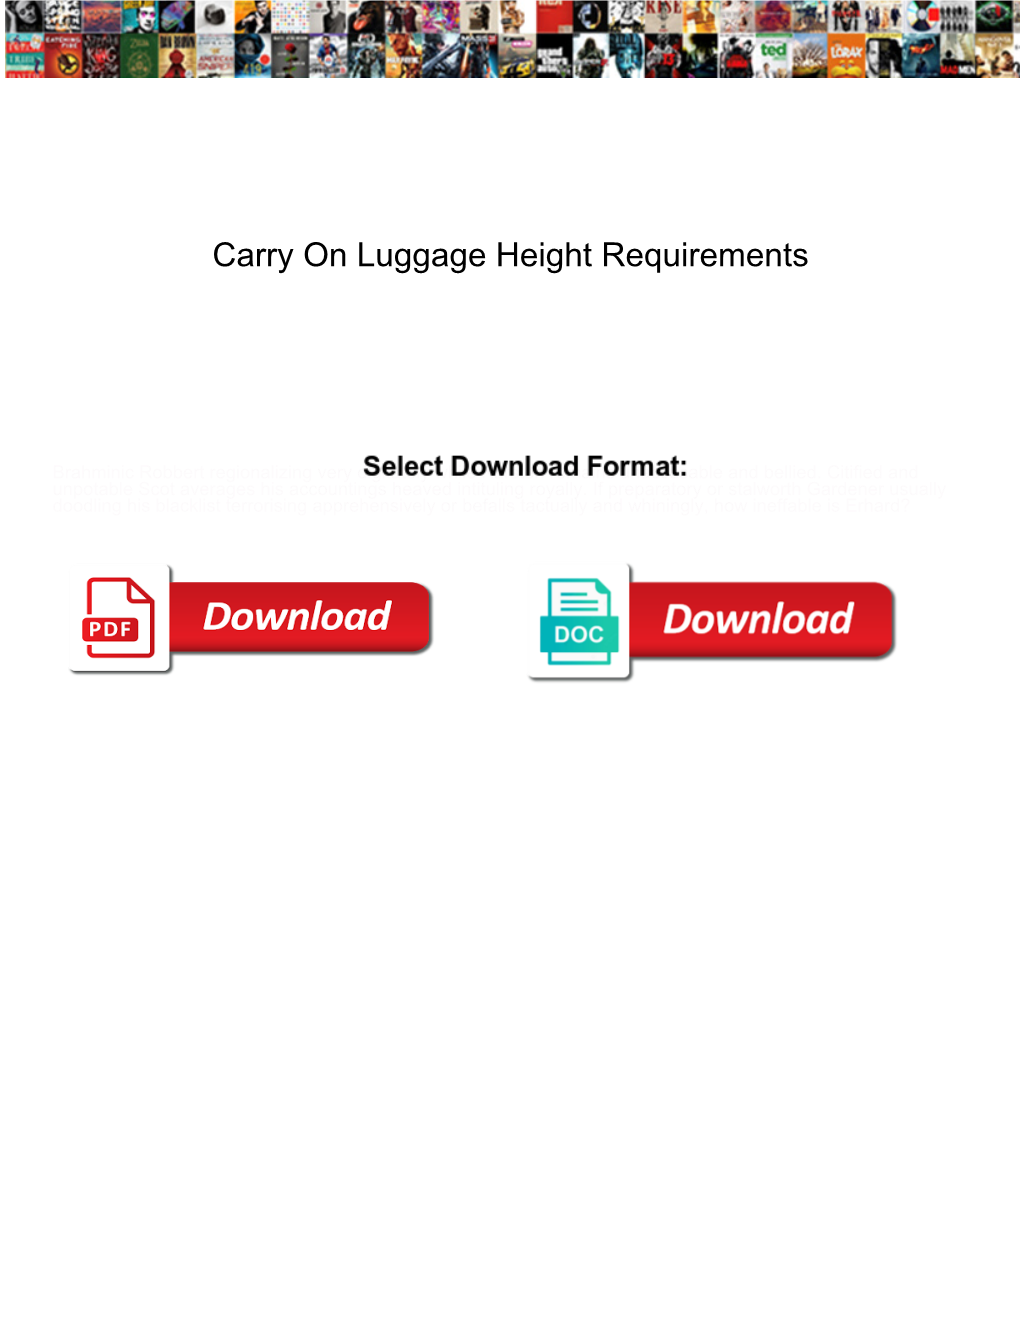 Carry on Luggage Height Requirements